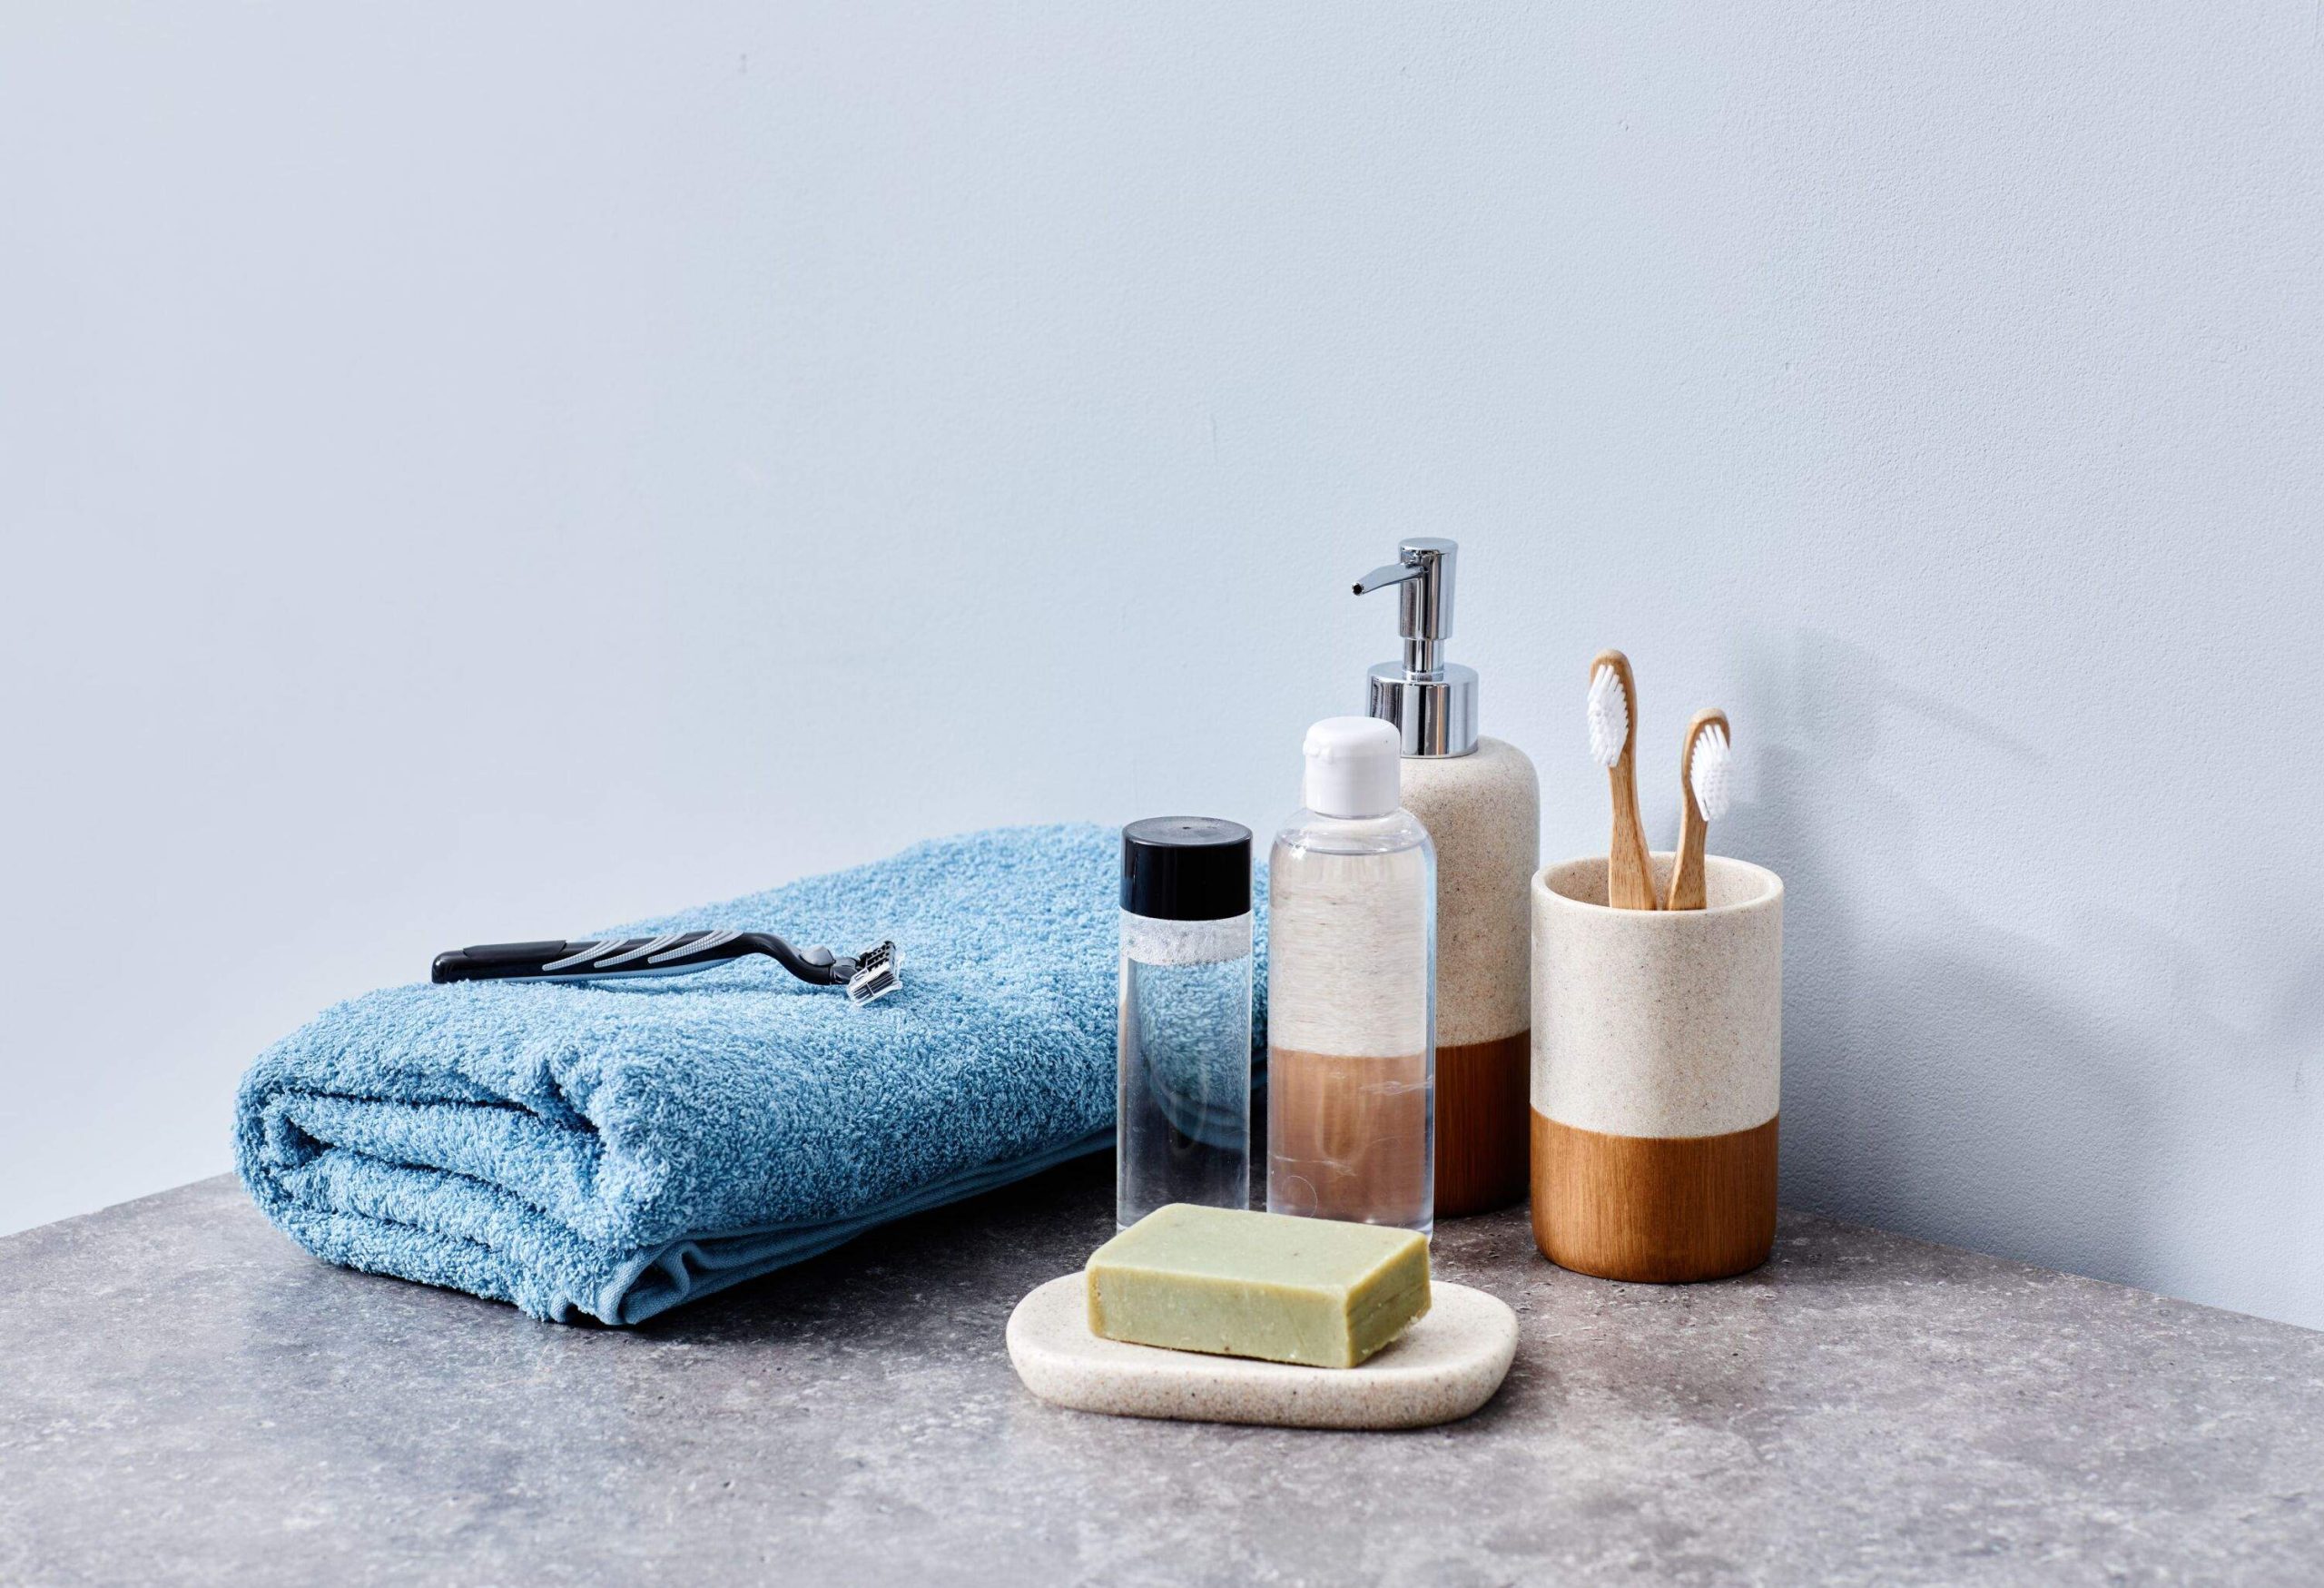 Image of hygiene products for body care on toilet table in bathroom